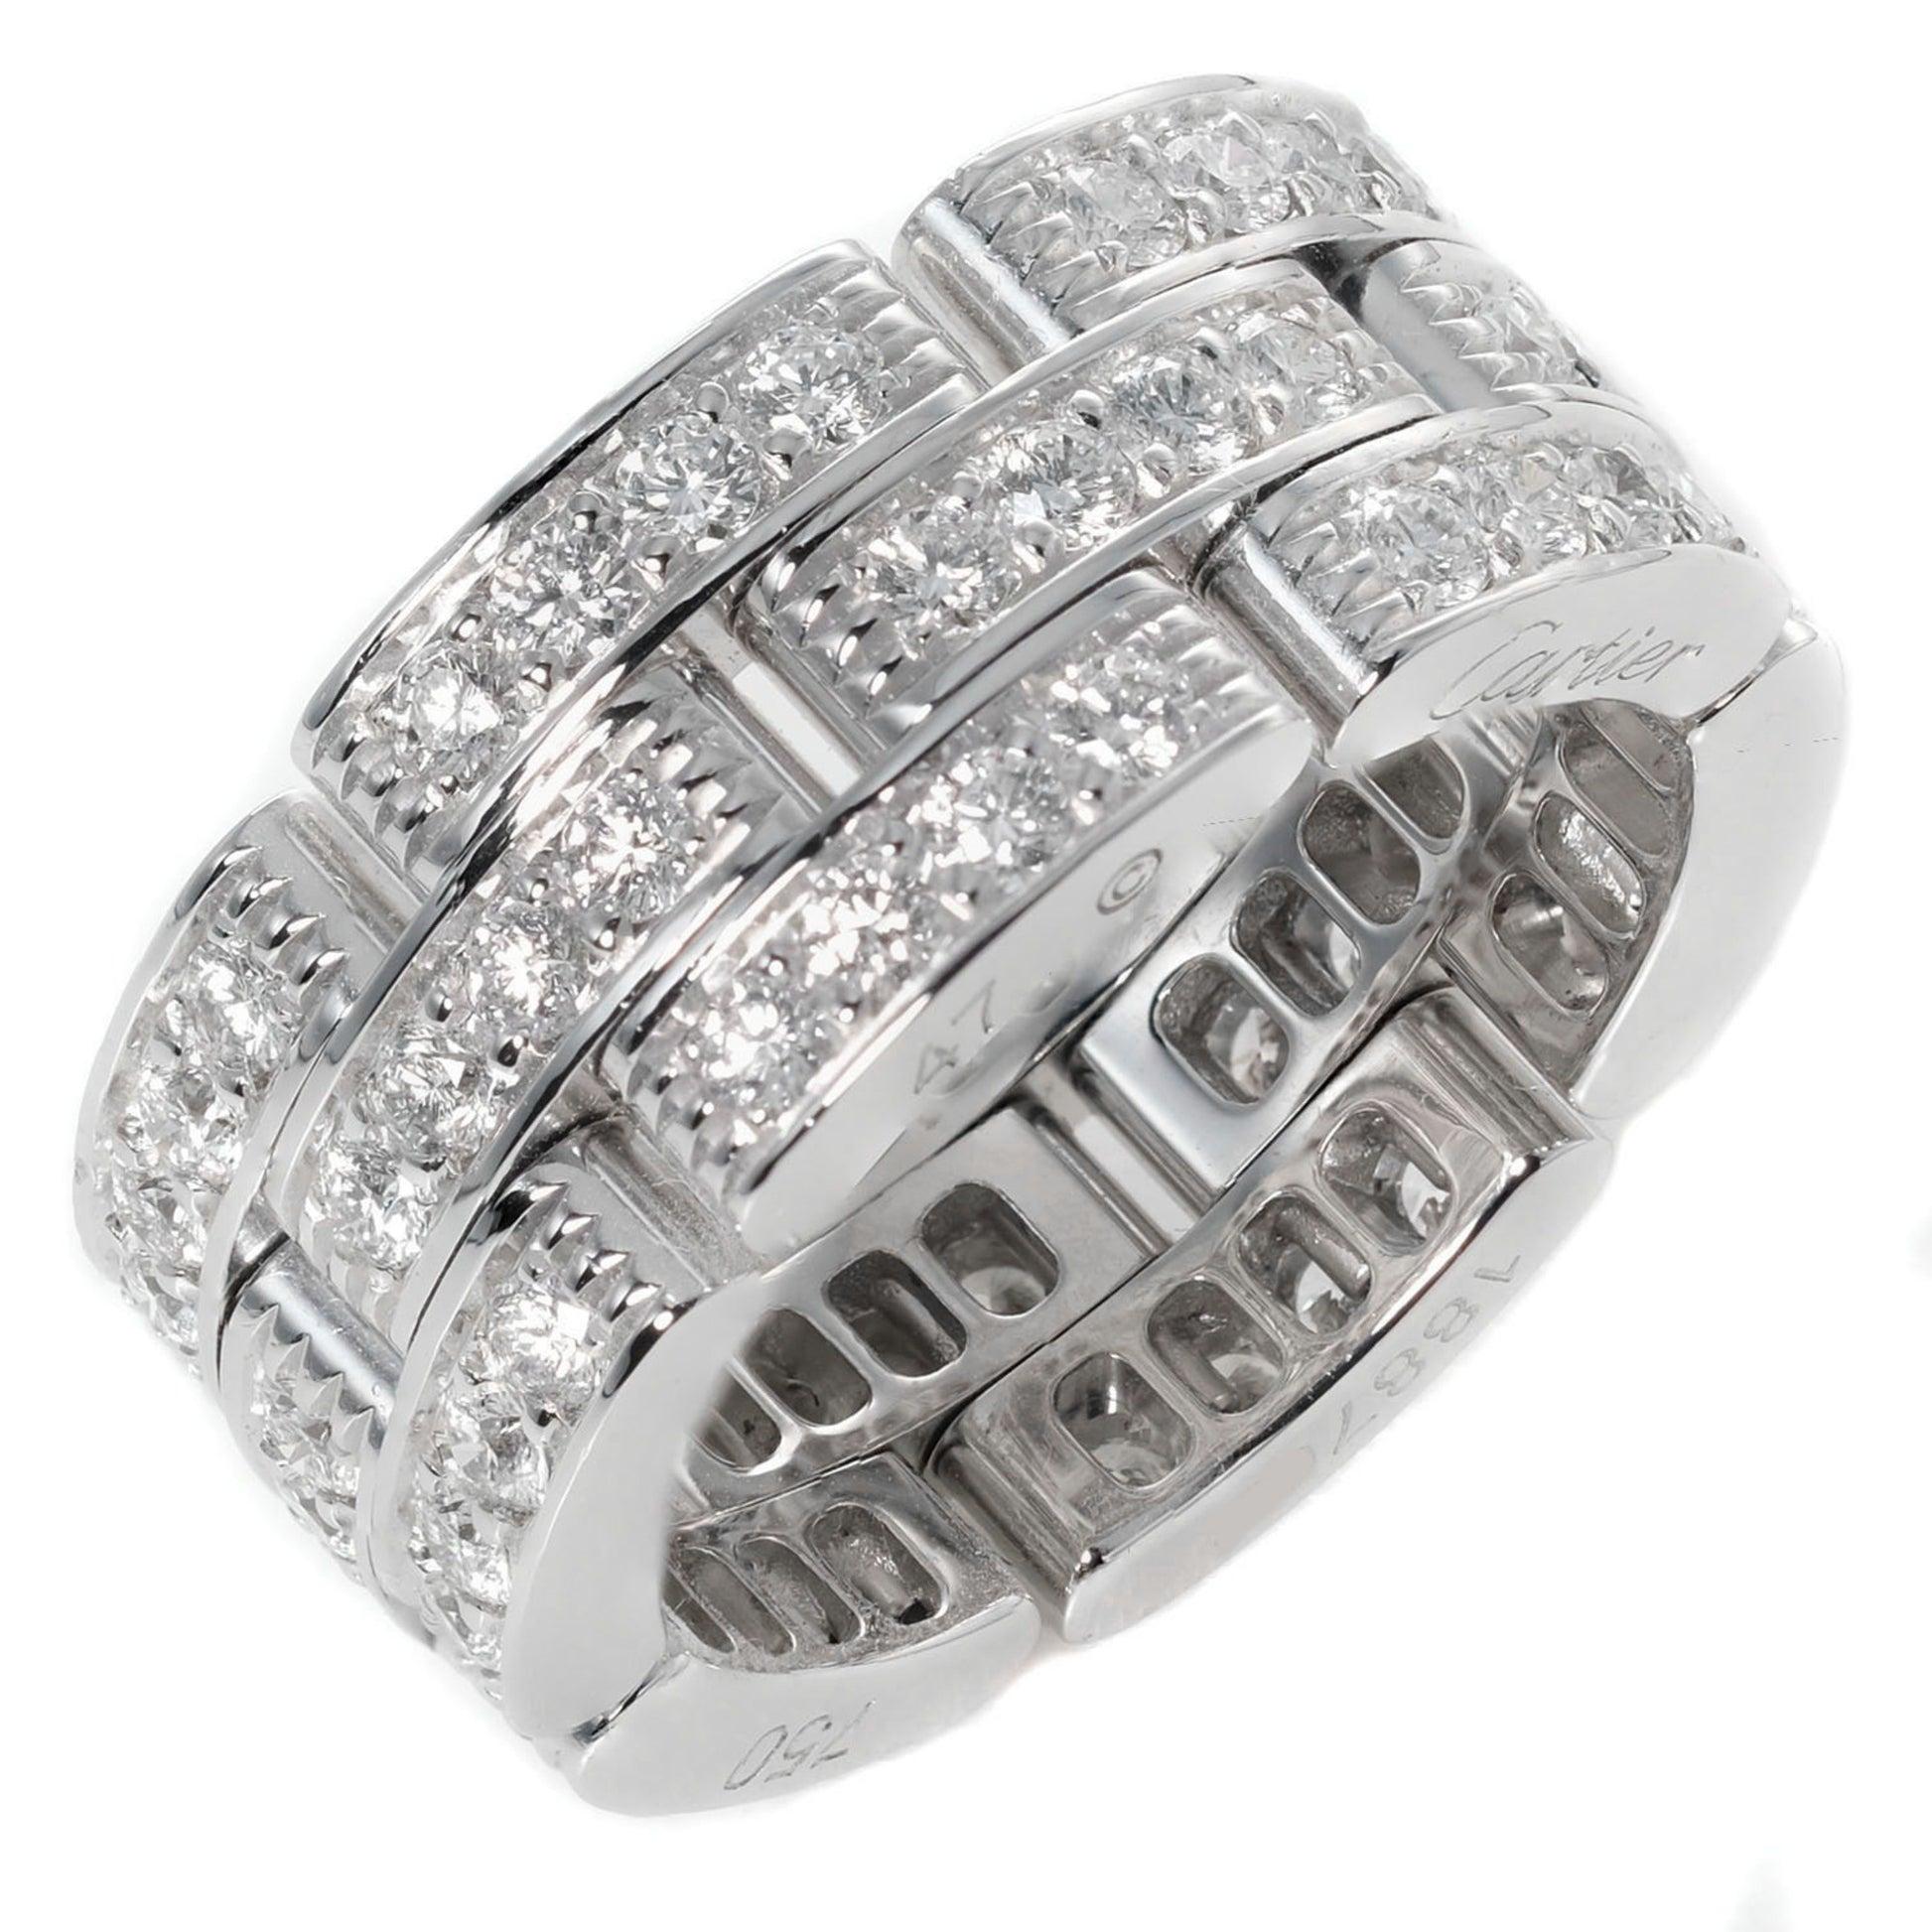 Cartier Maillon Panthere 3 Row Diamond Ring in 18K White Gold

Additional Information:
Brand: Cartier
Gender: Women
Gemstone: Diamond
Material: White gold (18K)
Ring size (US): 47
Condition details: This item has been used and may have some minor